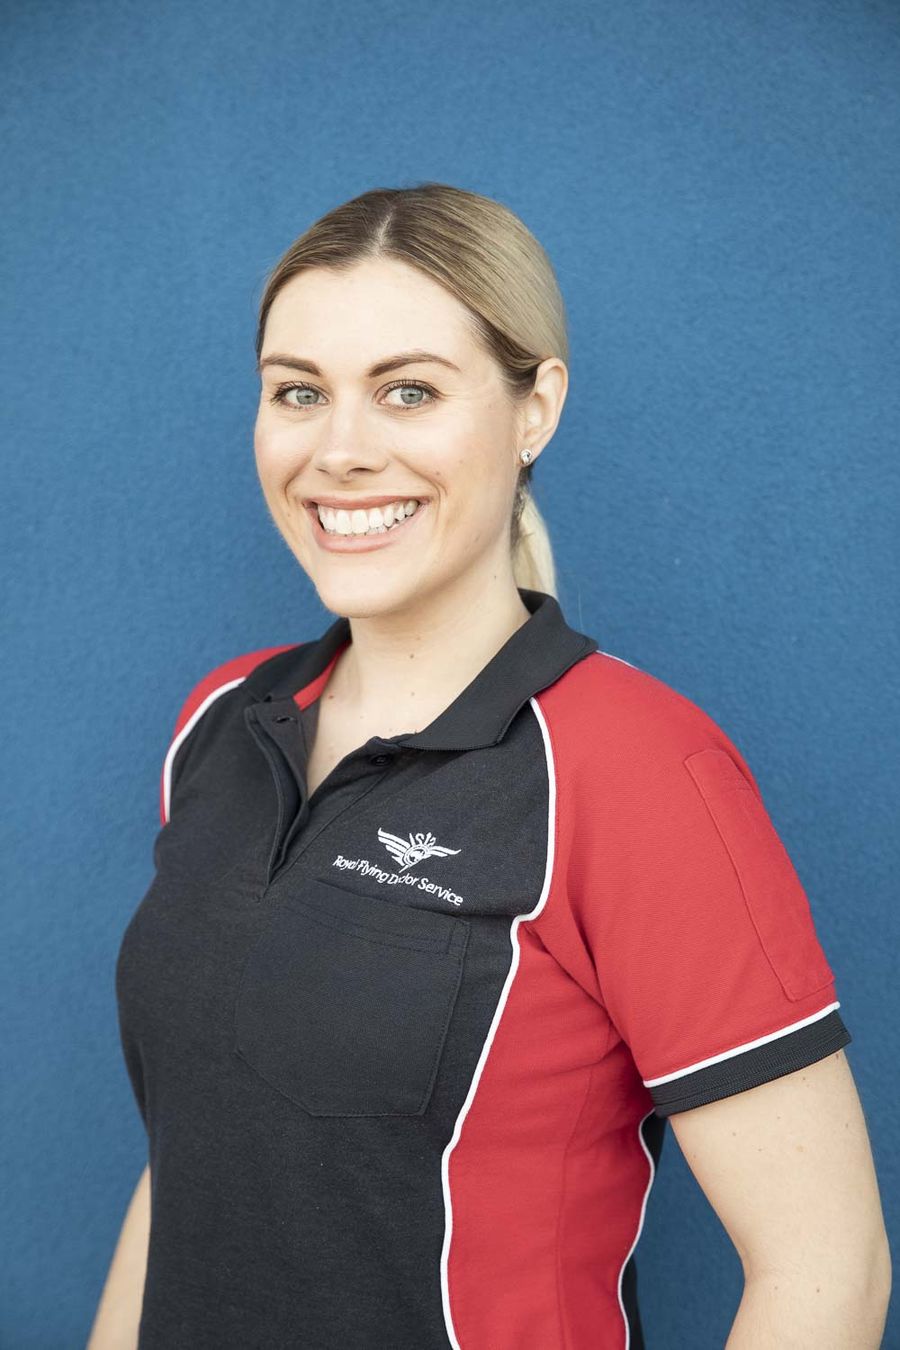 A woman with blonde hair smiles at the camera. She is wearing a red and navy polo shirt with RFDS logo on her chest. 